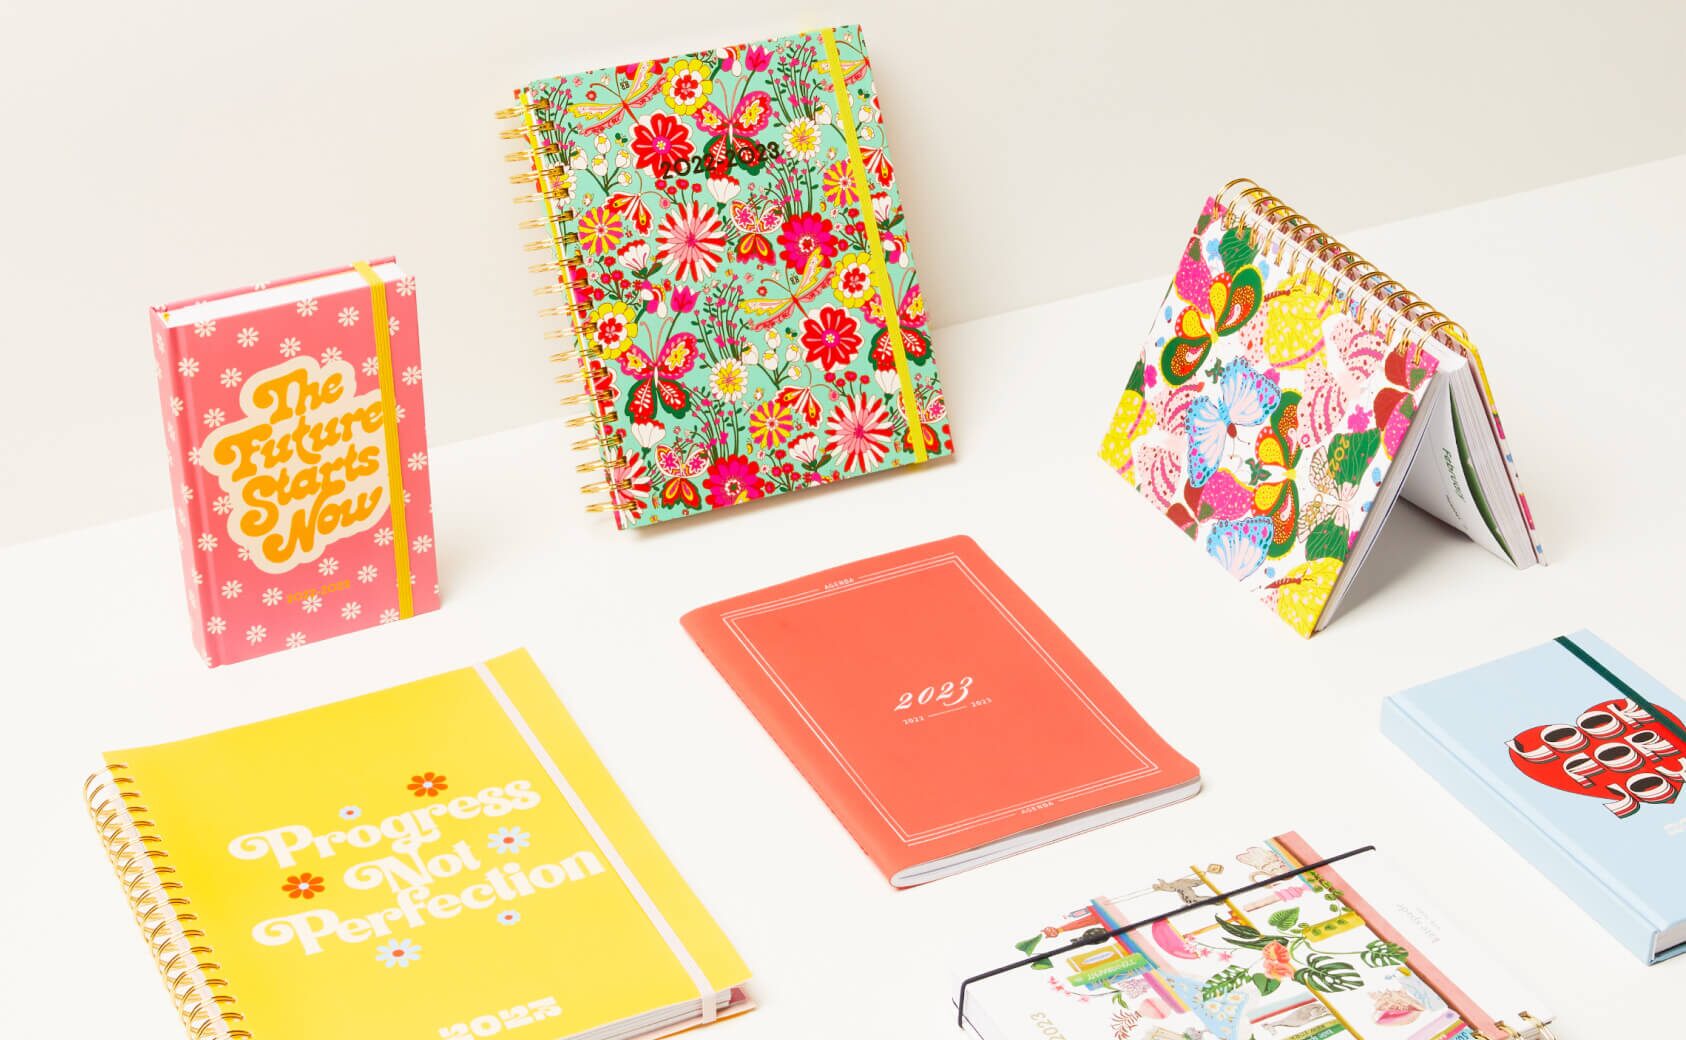 Agendas from NOTA, ban.do and Kate Spade New York.